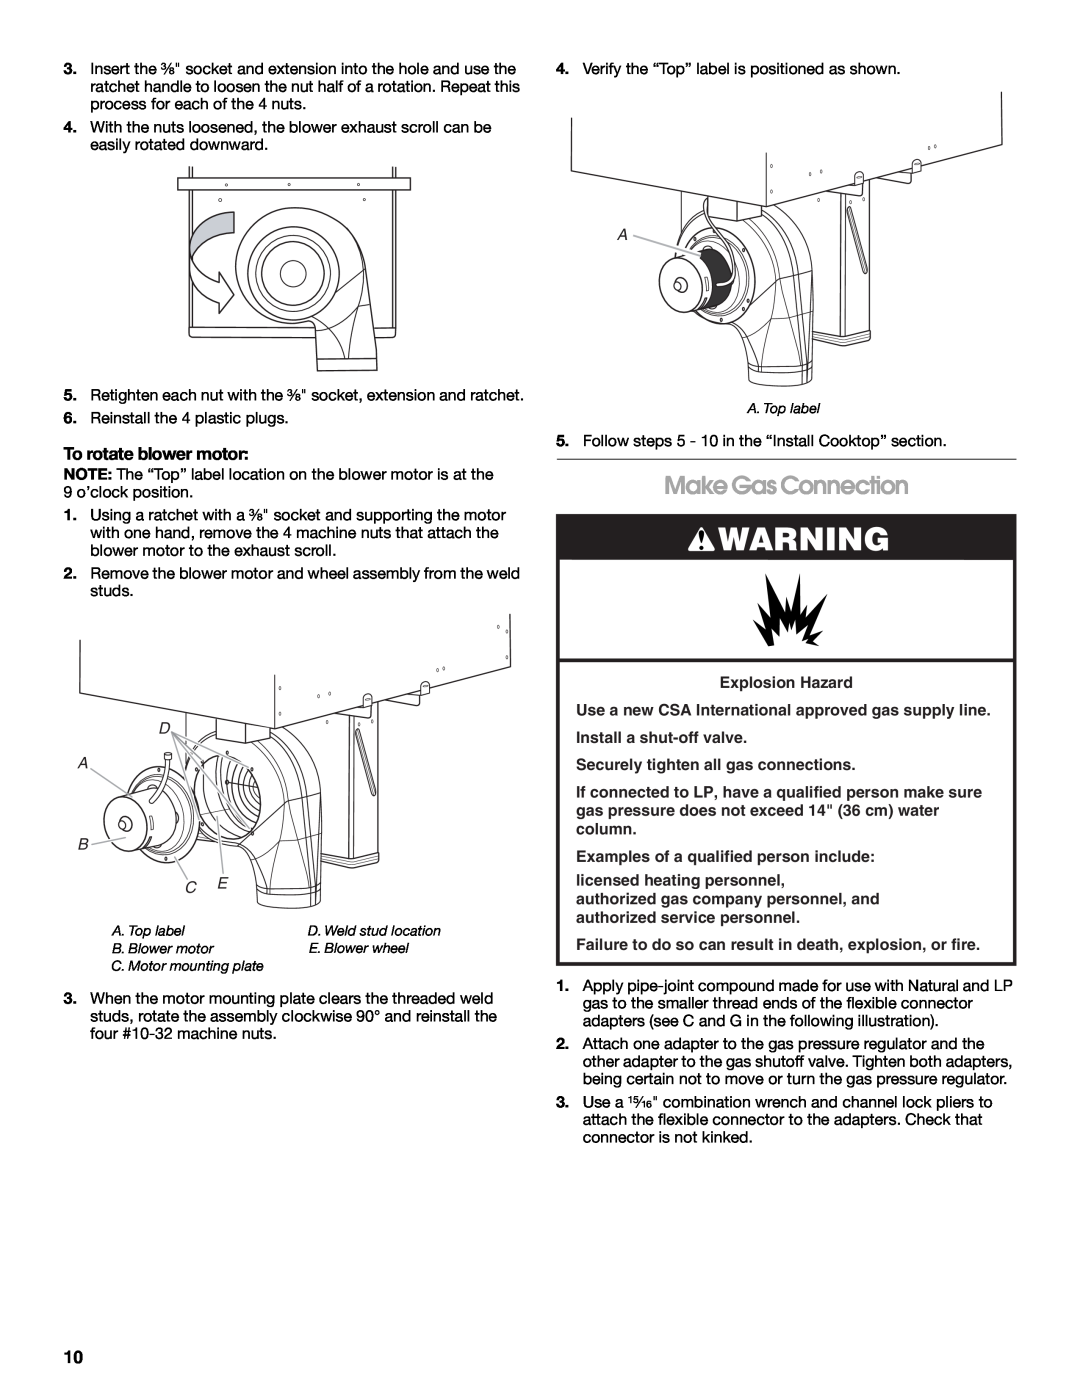 Jenn-Air W10574732A installation instructions Make Gas Connection, To rotate blower motor, D A B 